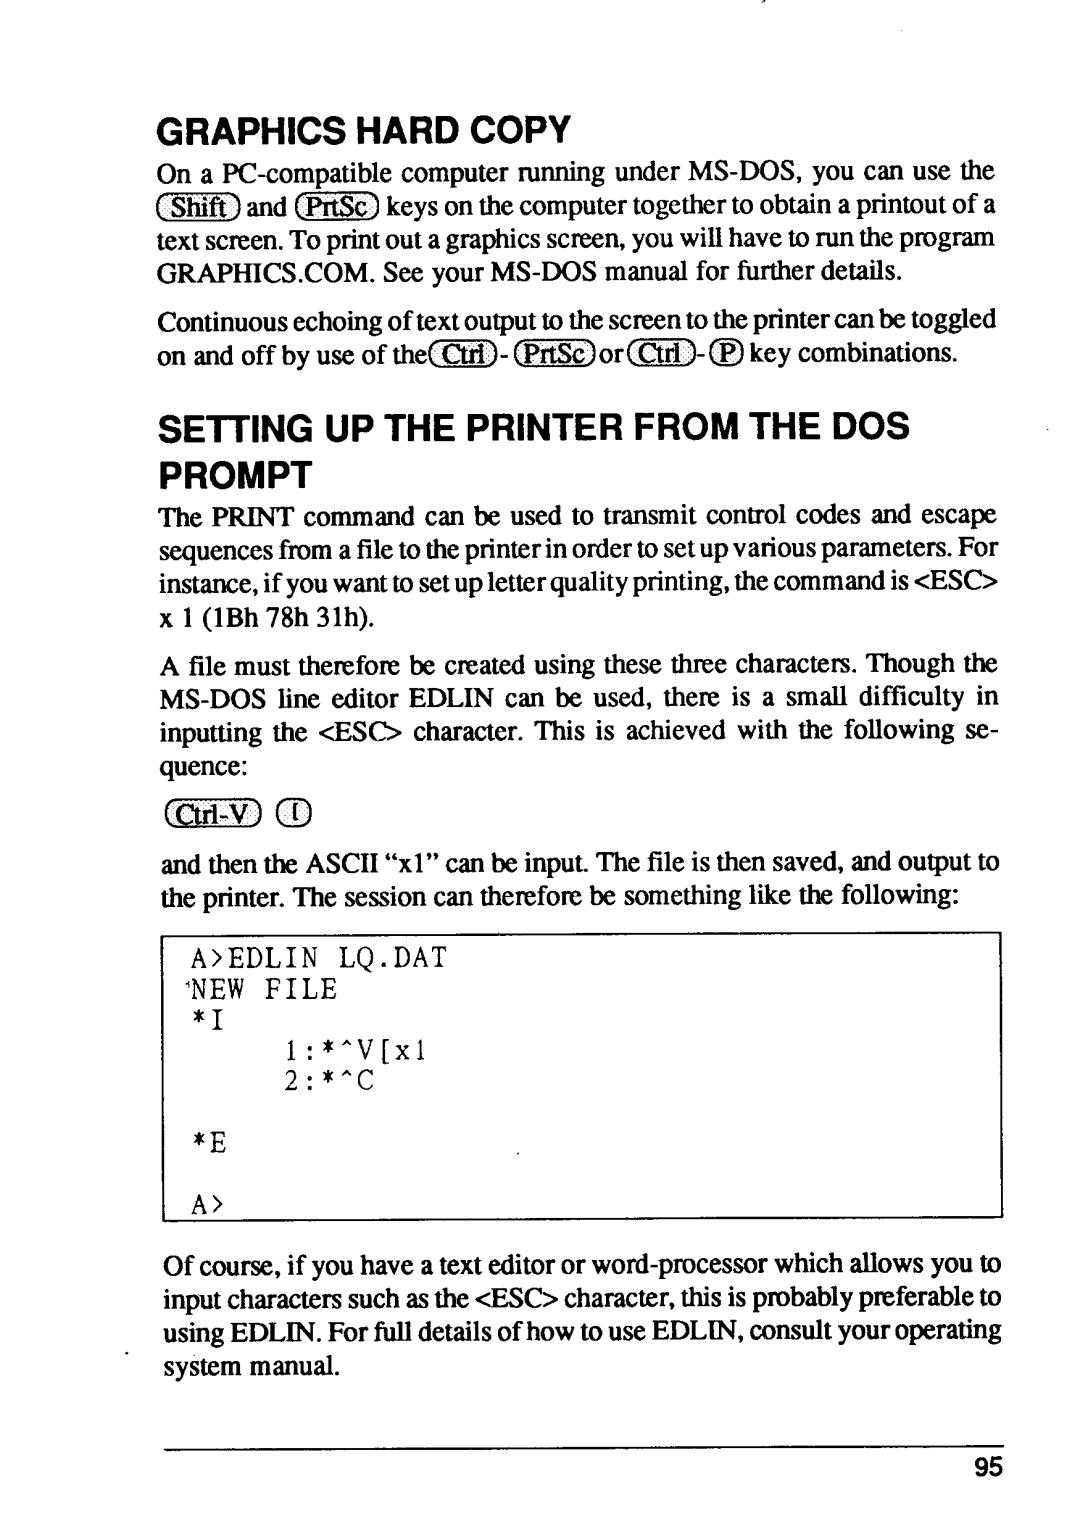 Star Micronics XB24-15, XB24-10 Graphics Hard Copy, Setting Up The Printer From The Dos Prompt, Aedlin Lq.Dat Newfile 